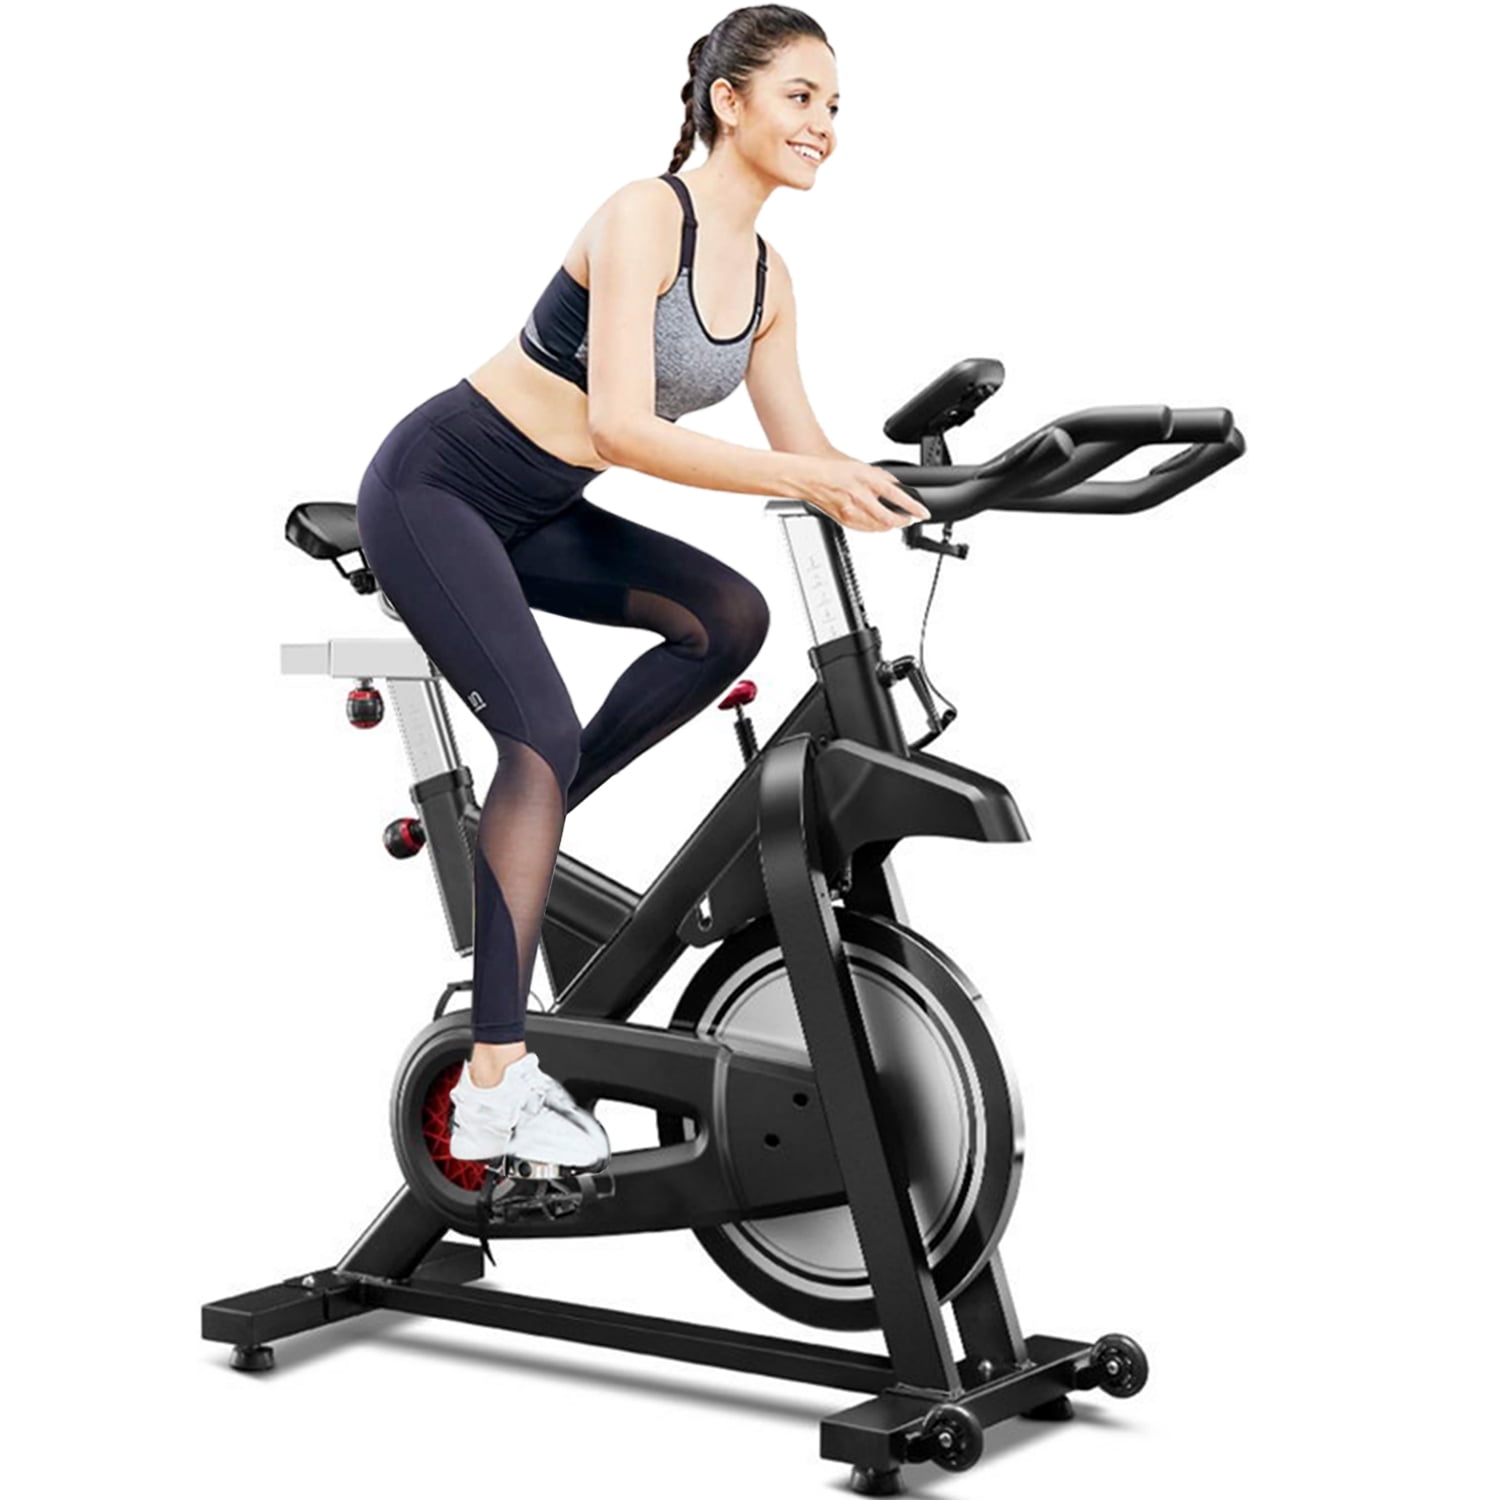 Heavy Duty Exercise Bike Fitness Cardio Workout Machine Home Gym Indoor Training 